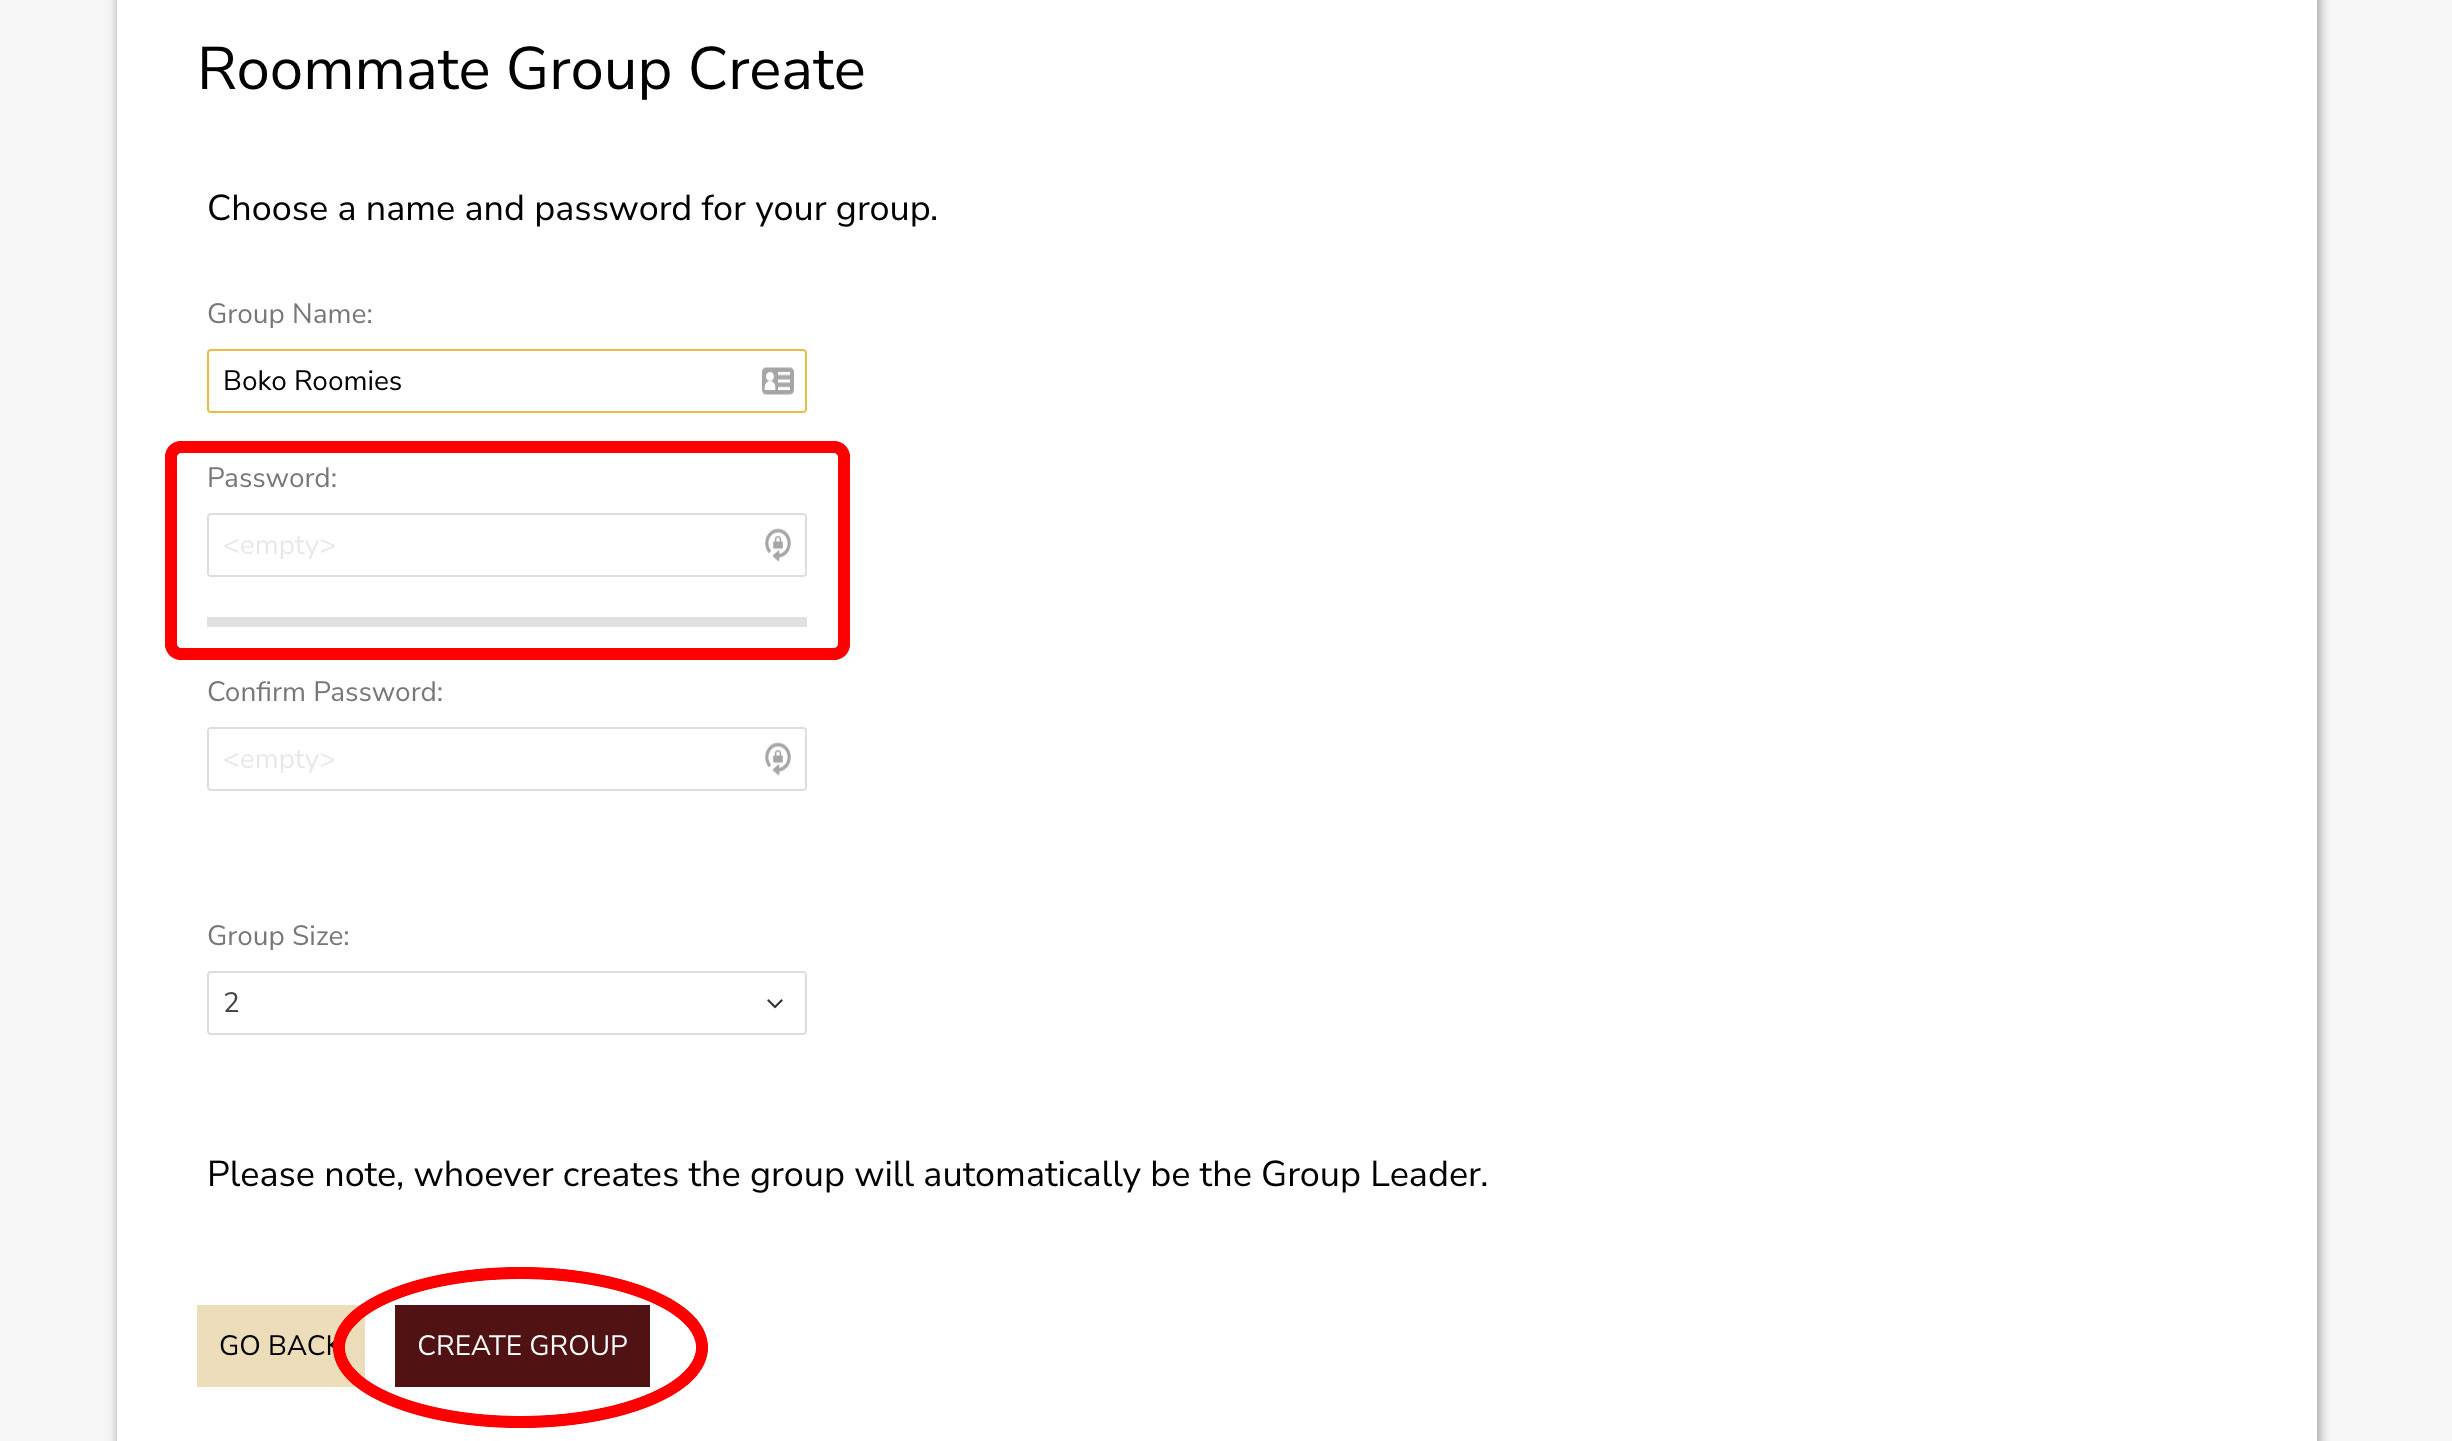 Screenshot of Roommate Group Create page in the Housing Portal.